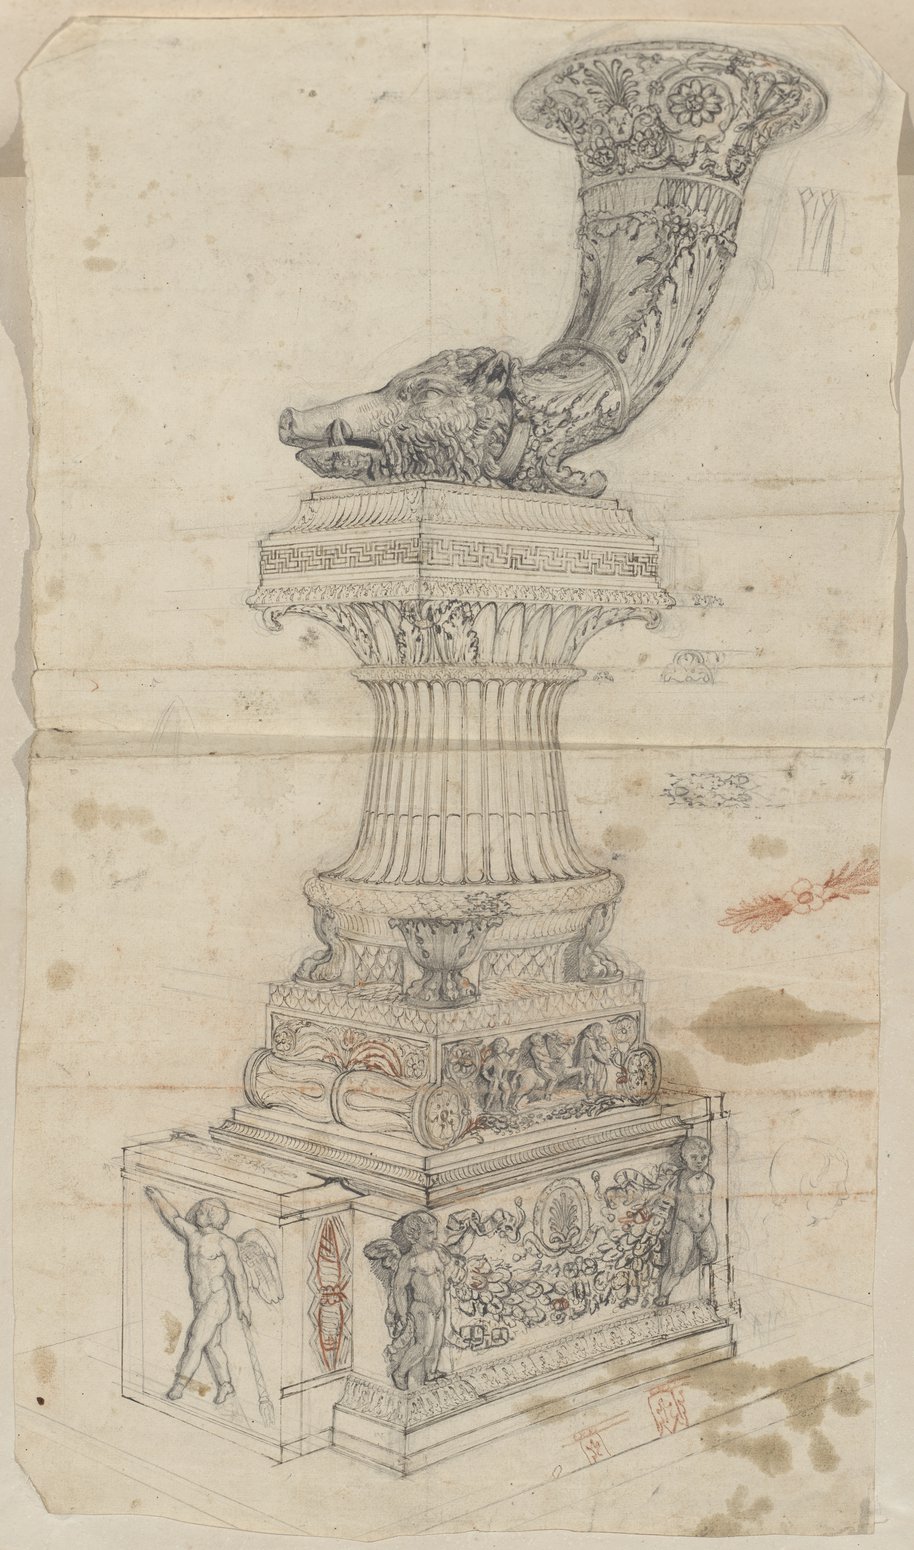 Visible reflectance photograph Pen, chalk and graphite drawing of a Rhyton candelabra with a drinking horn decorated with a boar's head on a tiered, ornamentally designed pedestal